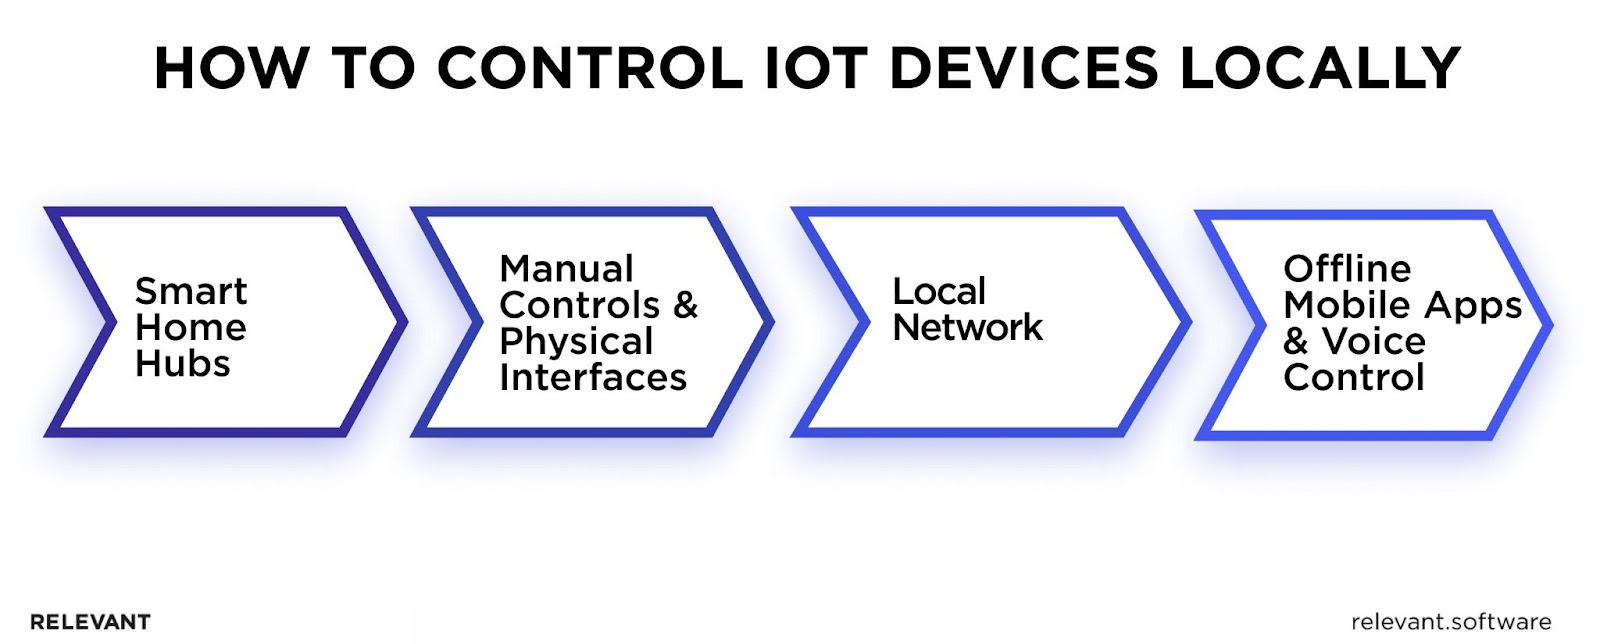 How to Control IoT Devices Locally